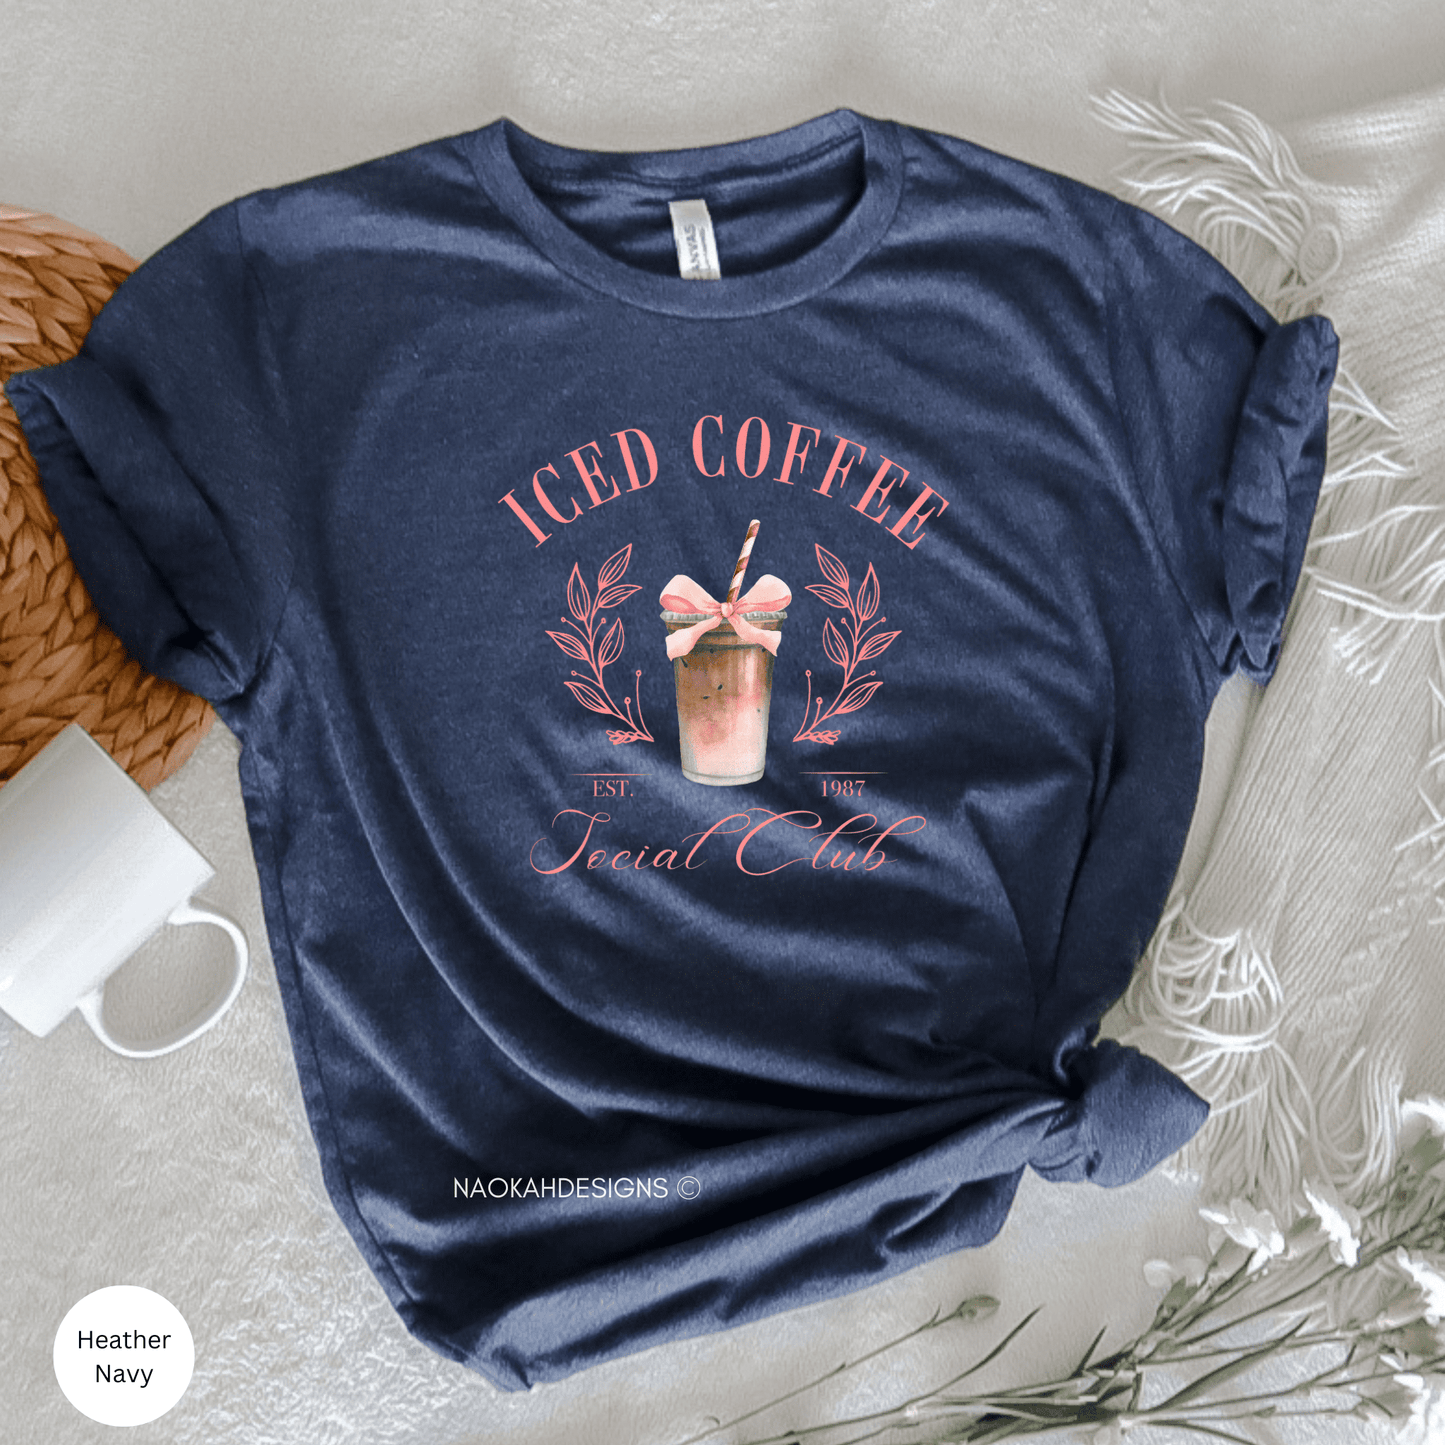 iced coffee social club shirt,trendy coffee shirt, coffee shirt ,mom coffee shirt, girls club shirt , cocktail shirt, trendy shirt design, caffeine addict graphic tee, coquette aesthetic coffee shirt, gift for coffee lover 